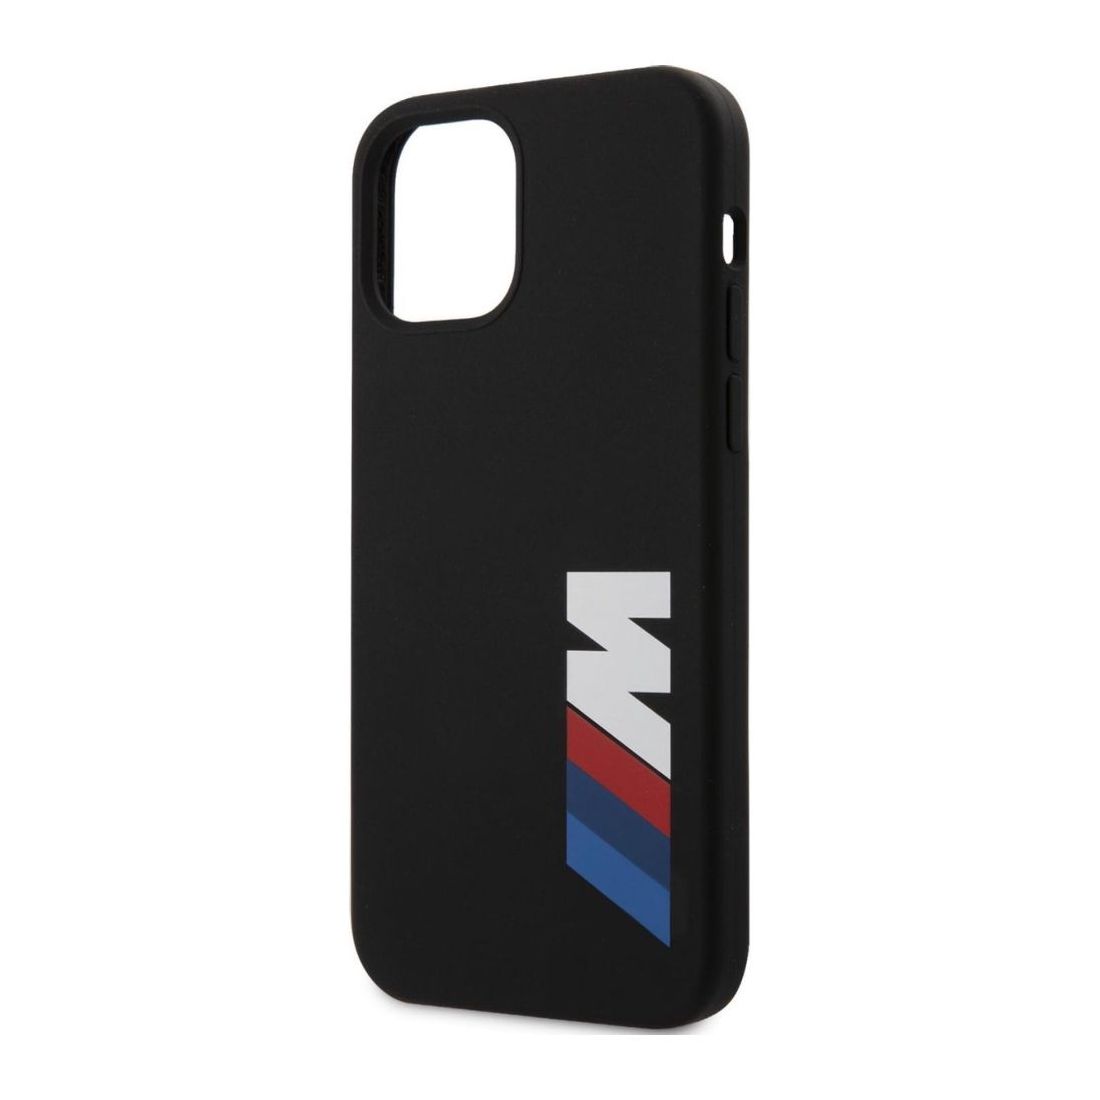 BMW M Collection Liquid Silicone Case Printed Big Logo Black for iPhone 12 Pro/12